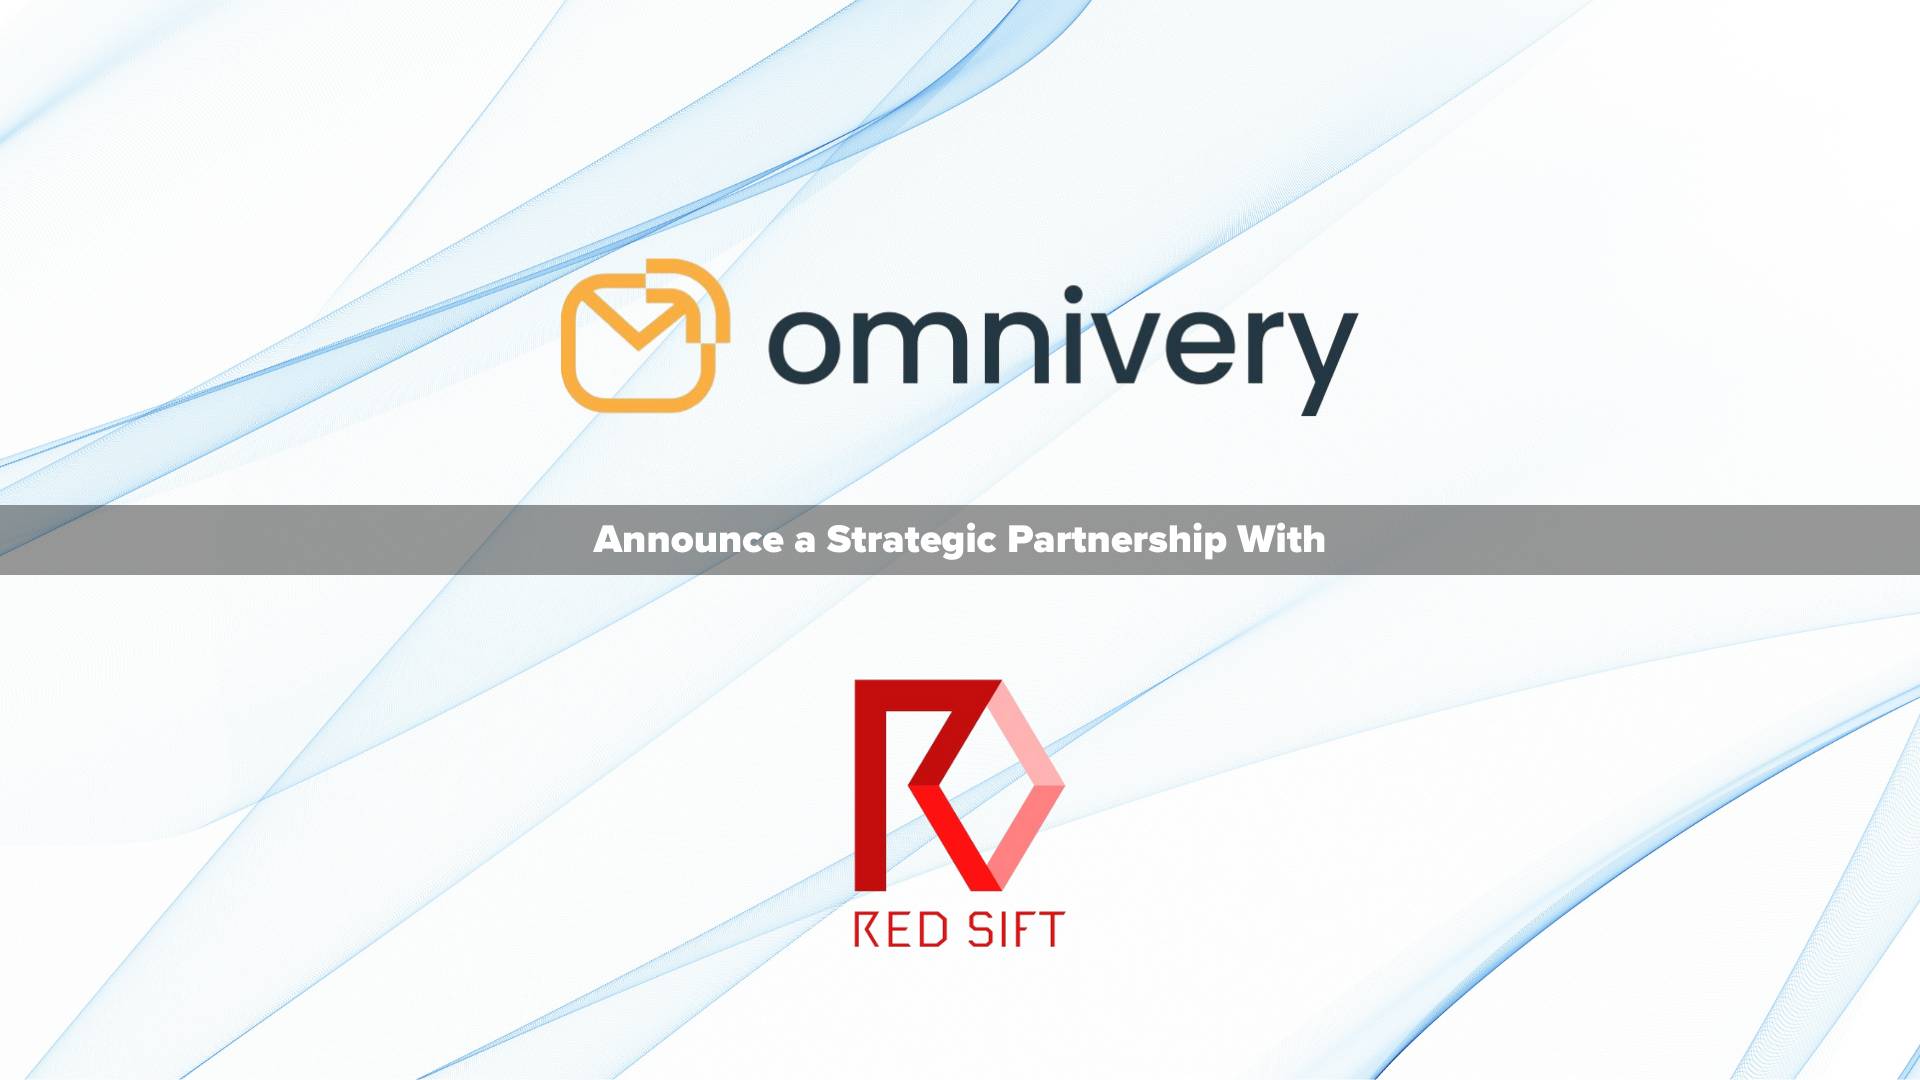 Omnivery announces strategic partnership with Red Sift to strengthen email authentication and security